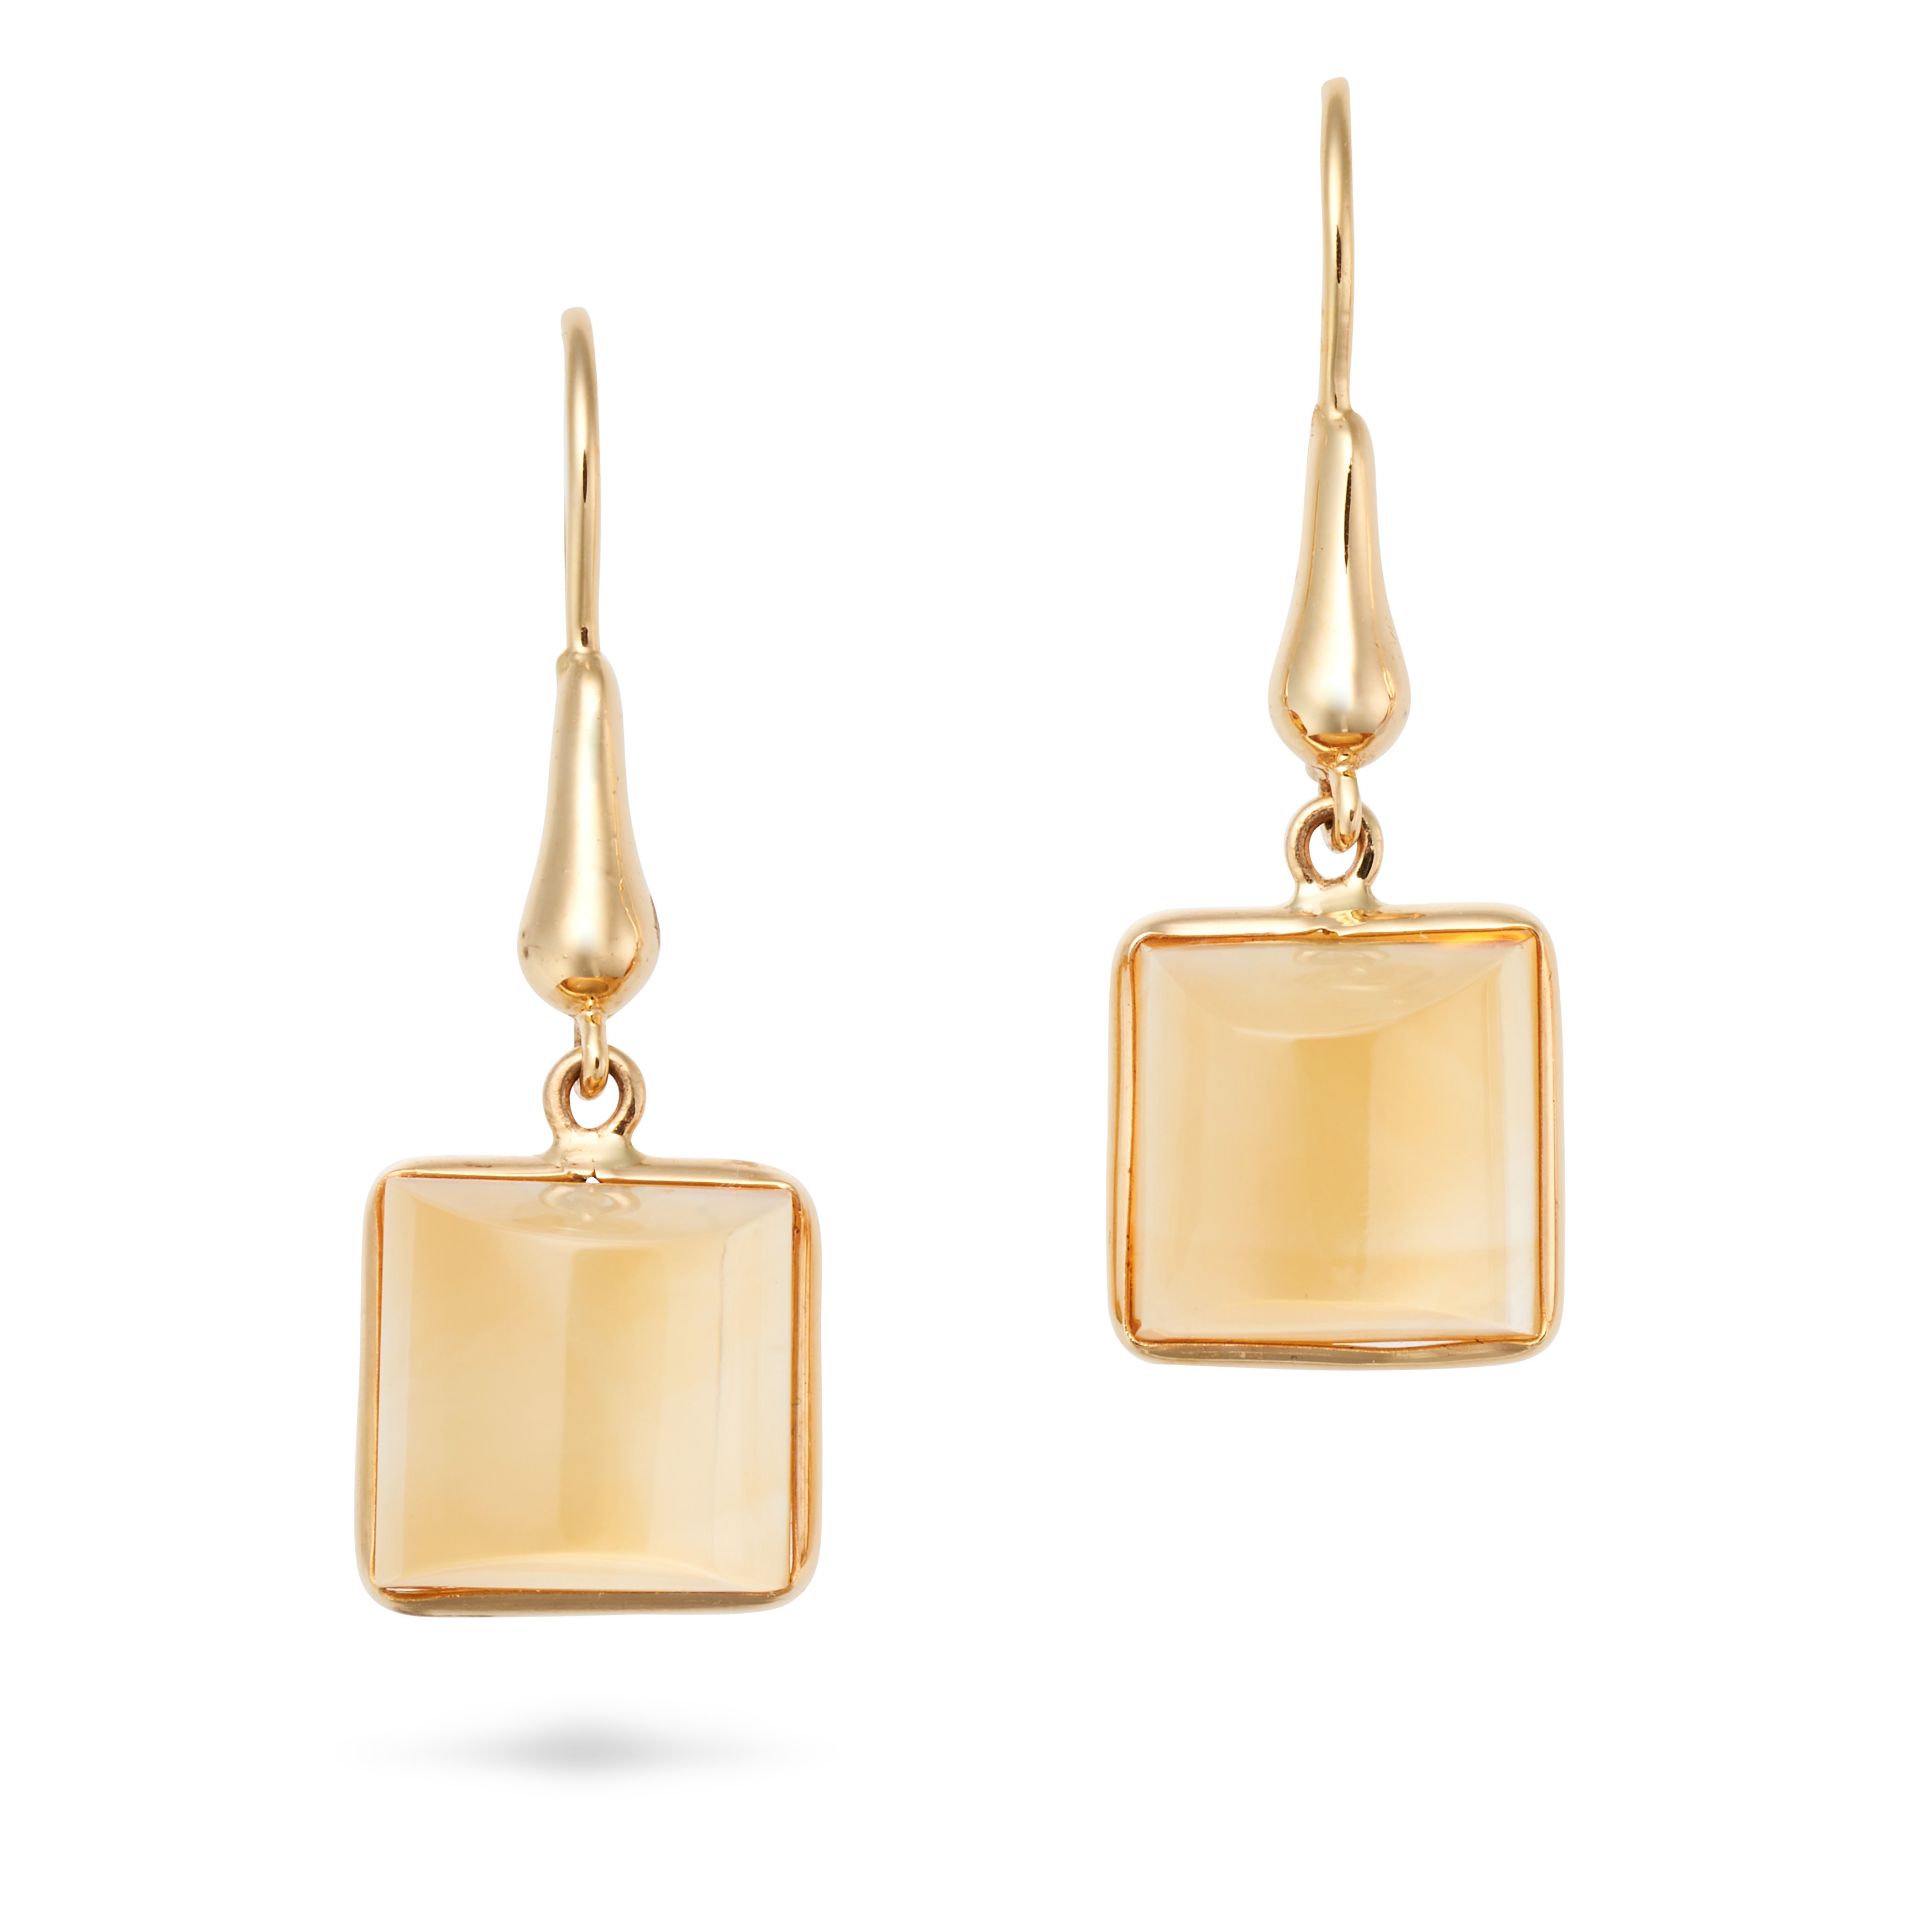 A PAIR OF CITRINE DROP EARRINGS each set with a fancy cabochon citrine, stamped 18K, 3.1cm, 3.7g.